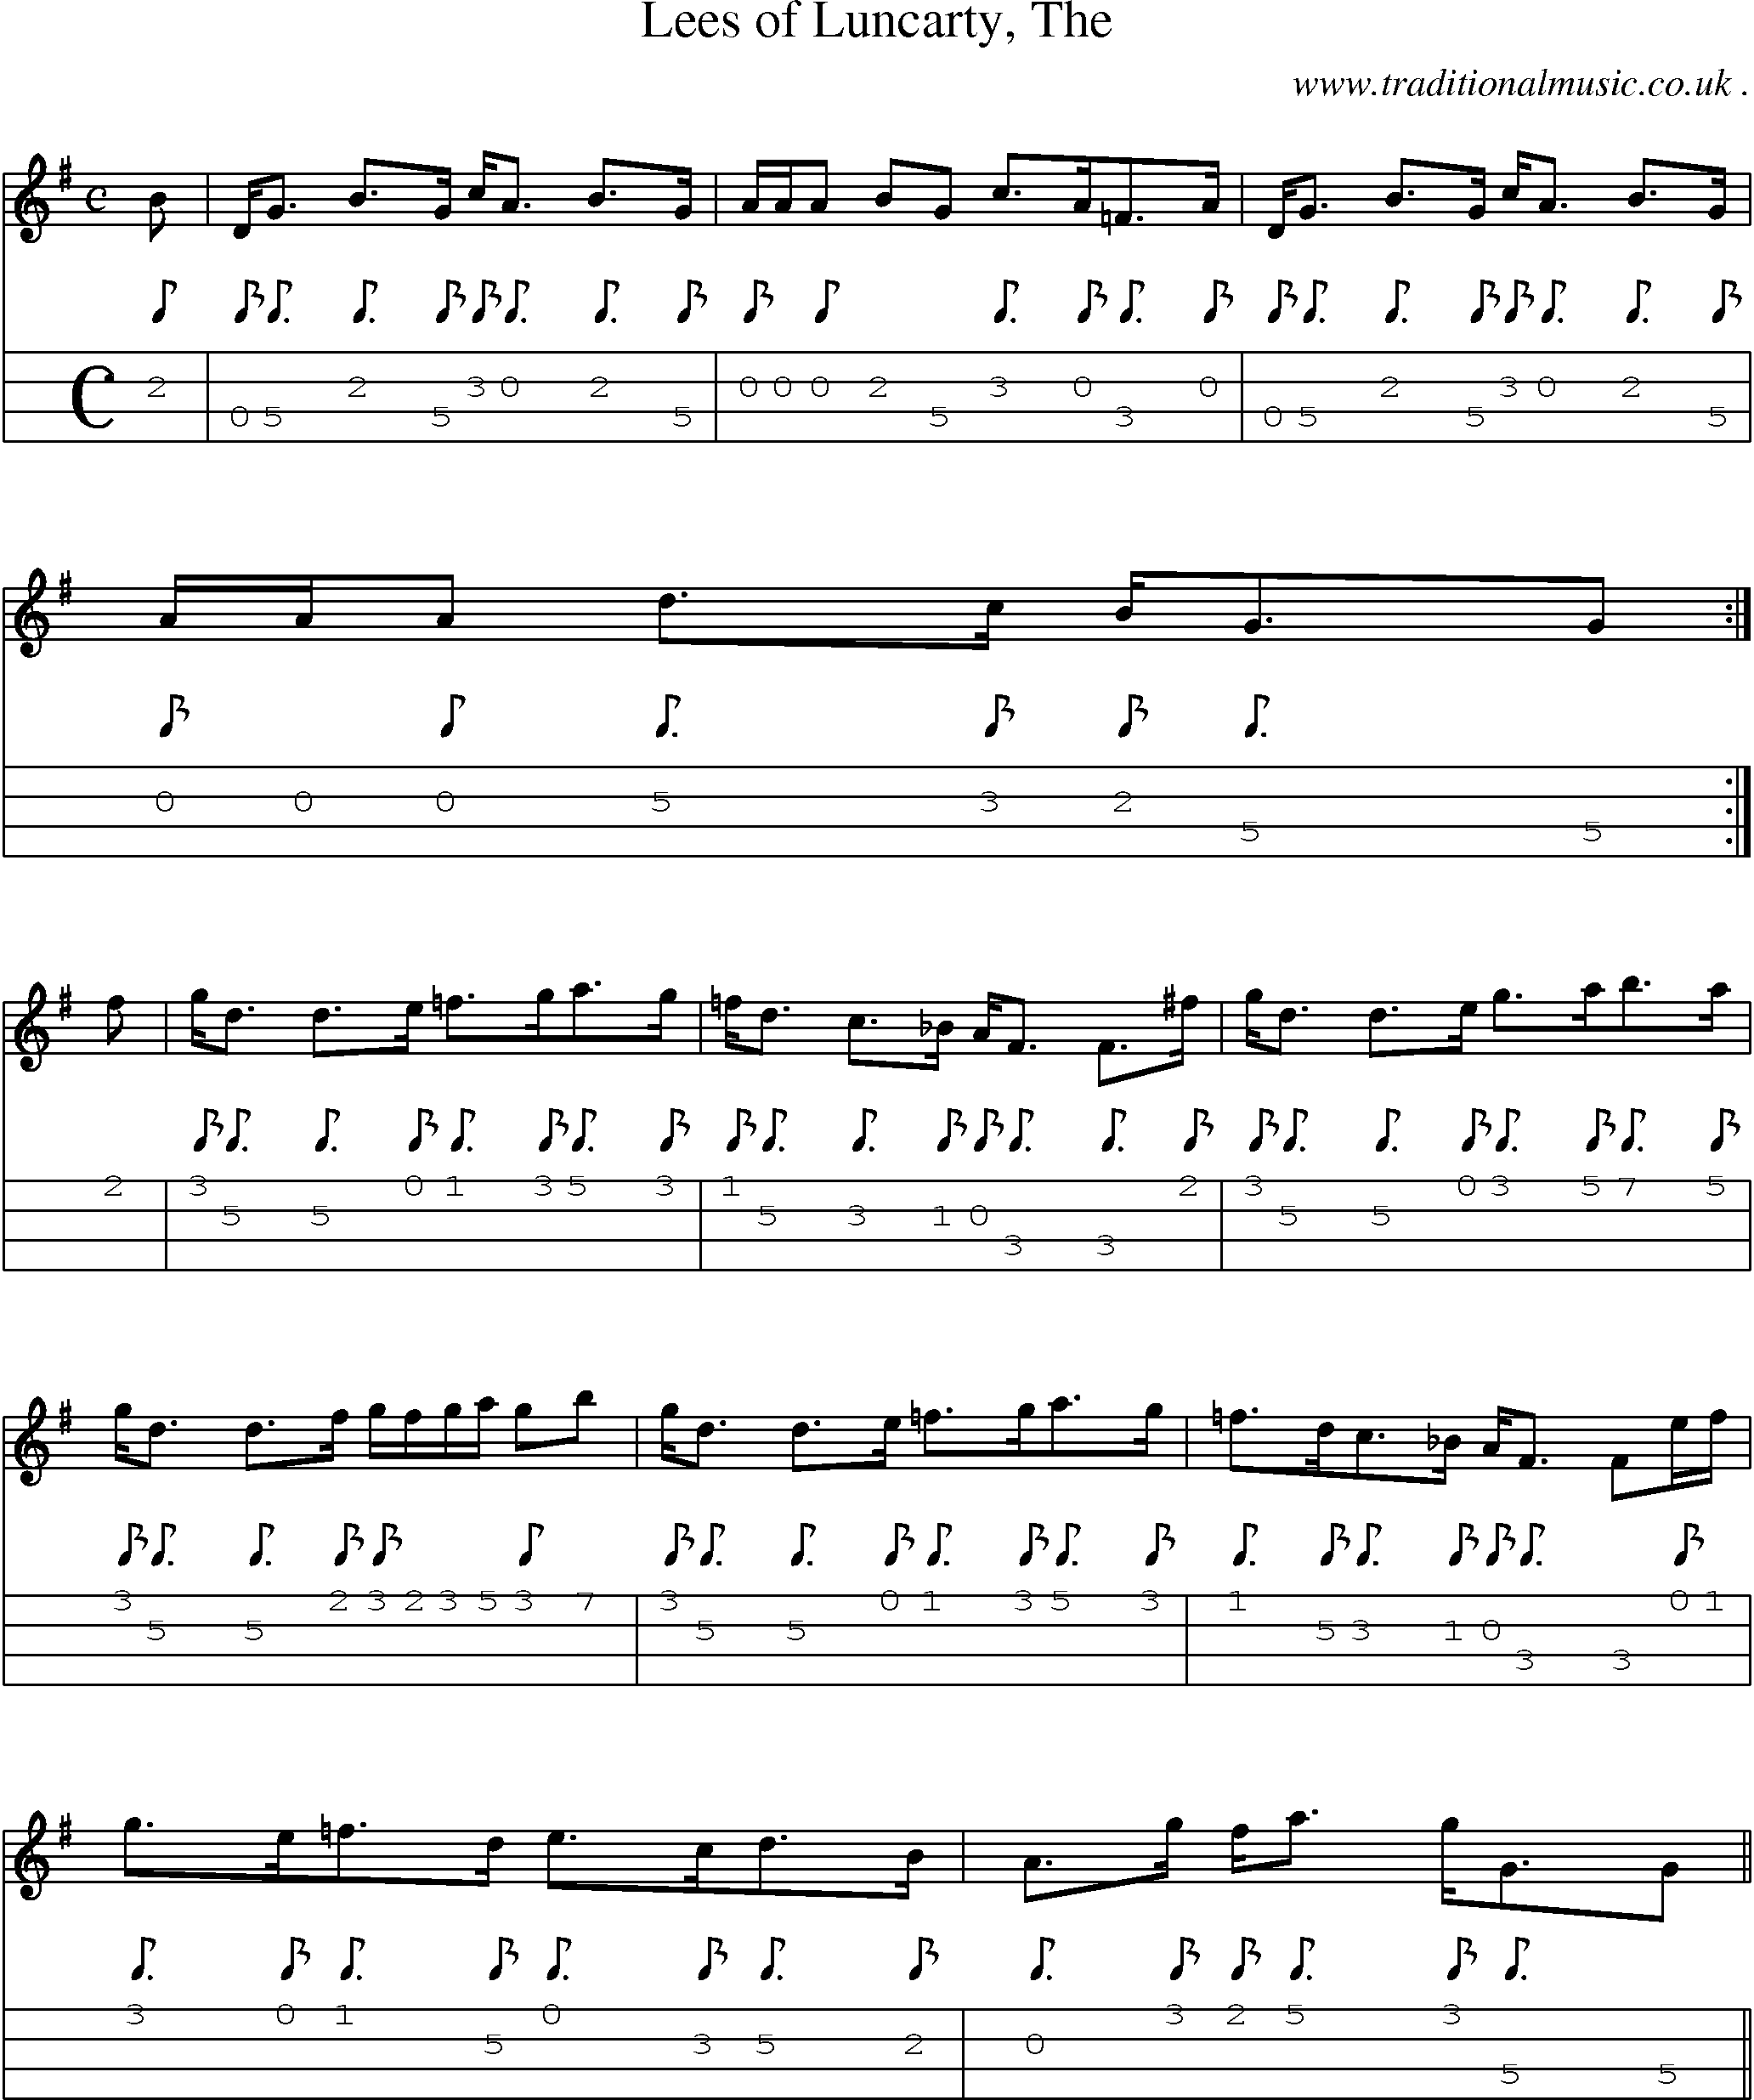 Sheet-music  score, Chords and Mandolin Tabs for Lees Of Luncarty The